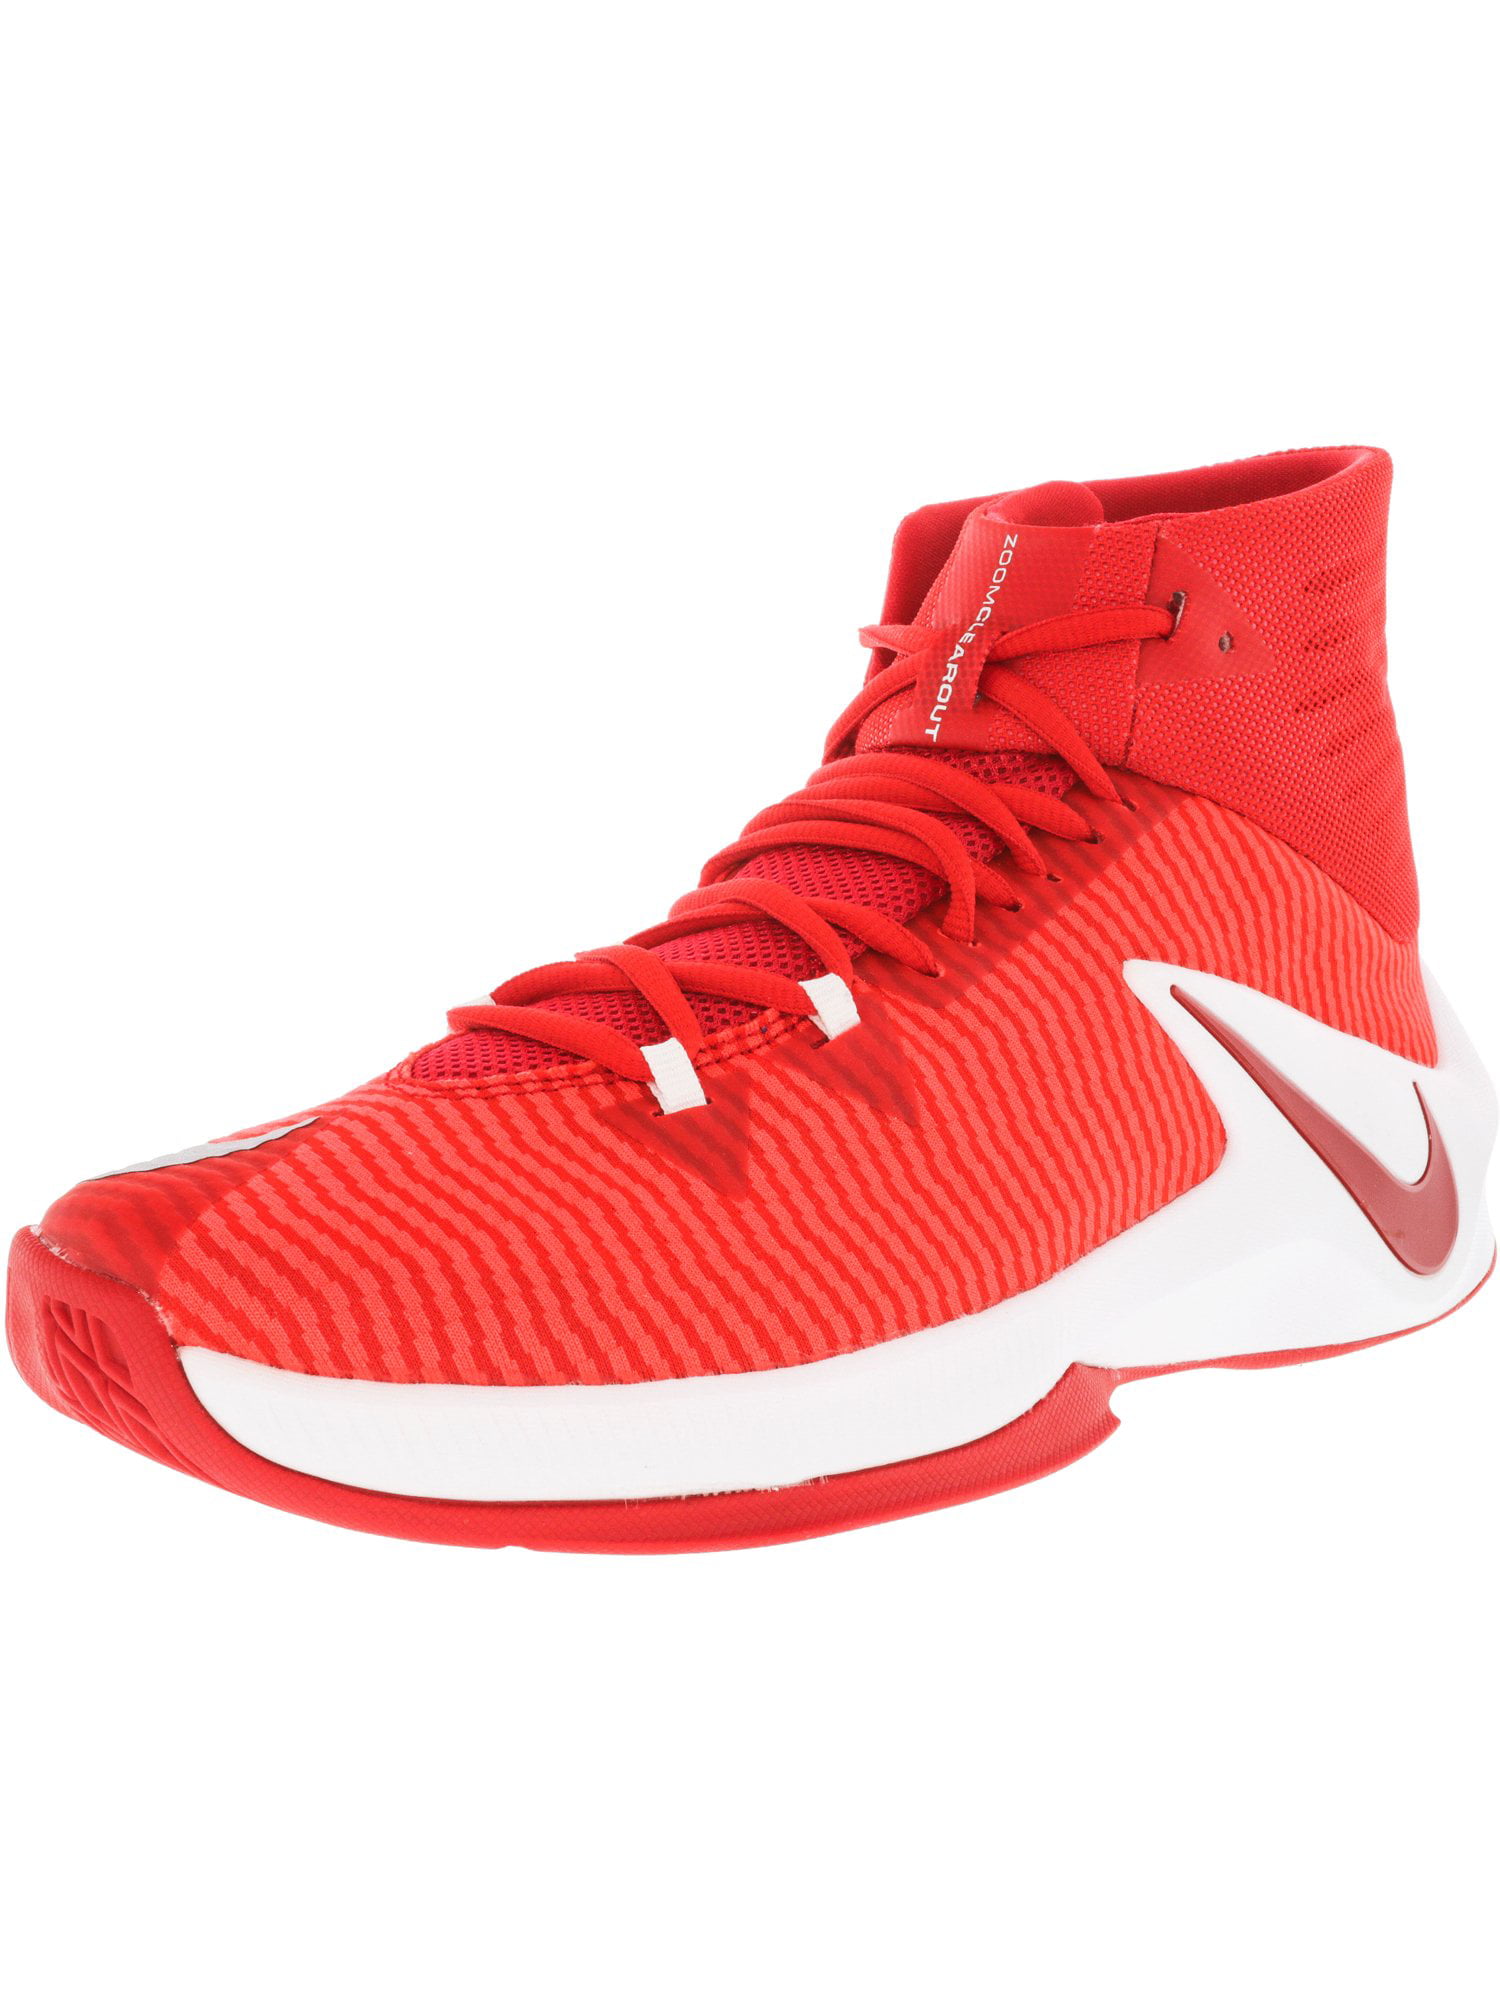 Ankle-High Fabric Basketball Shoe 